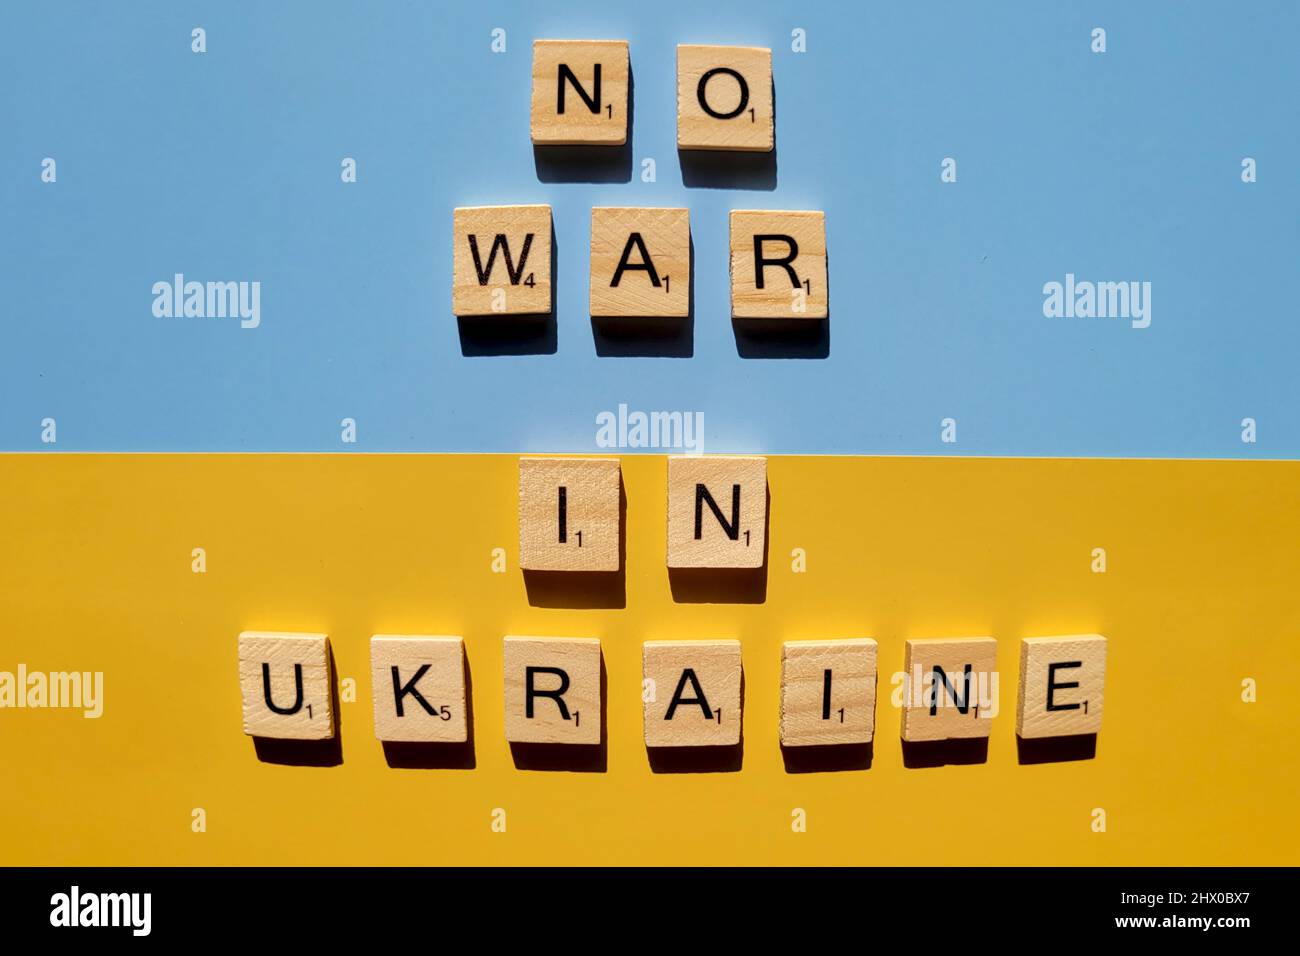 Words on wooden alphabet letters on yellow, blue background close up. Flat lay. Concept of Ukraine freedom and support. Protest action. Stop war. Stock Photo